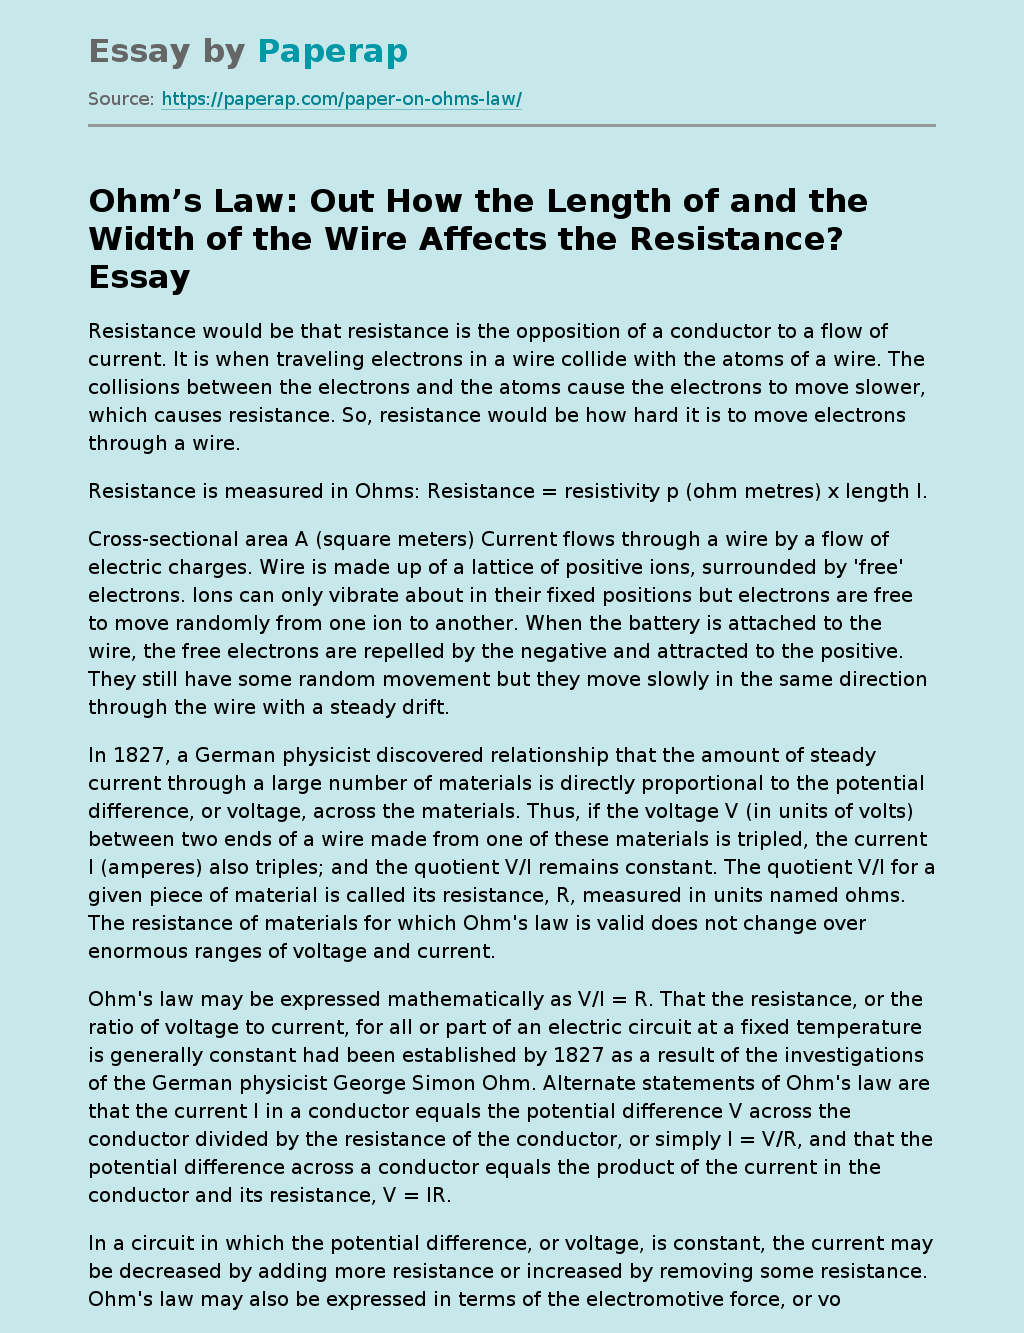 Ohm’s Law: Out How the Length of and the Width of the Wire Affects the Resistance?